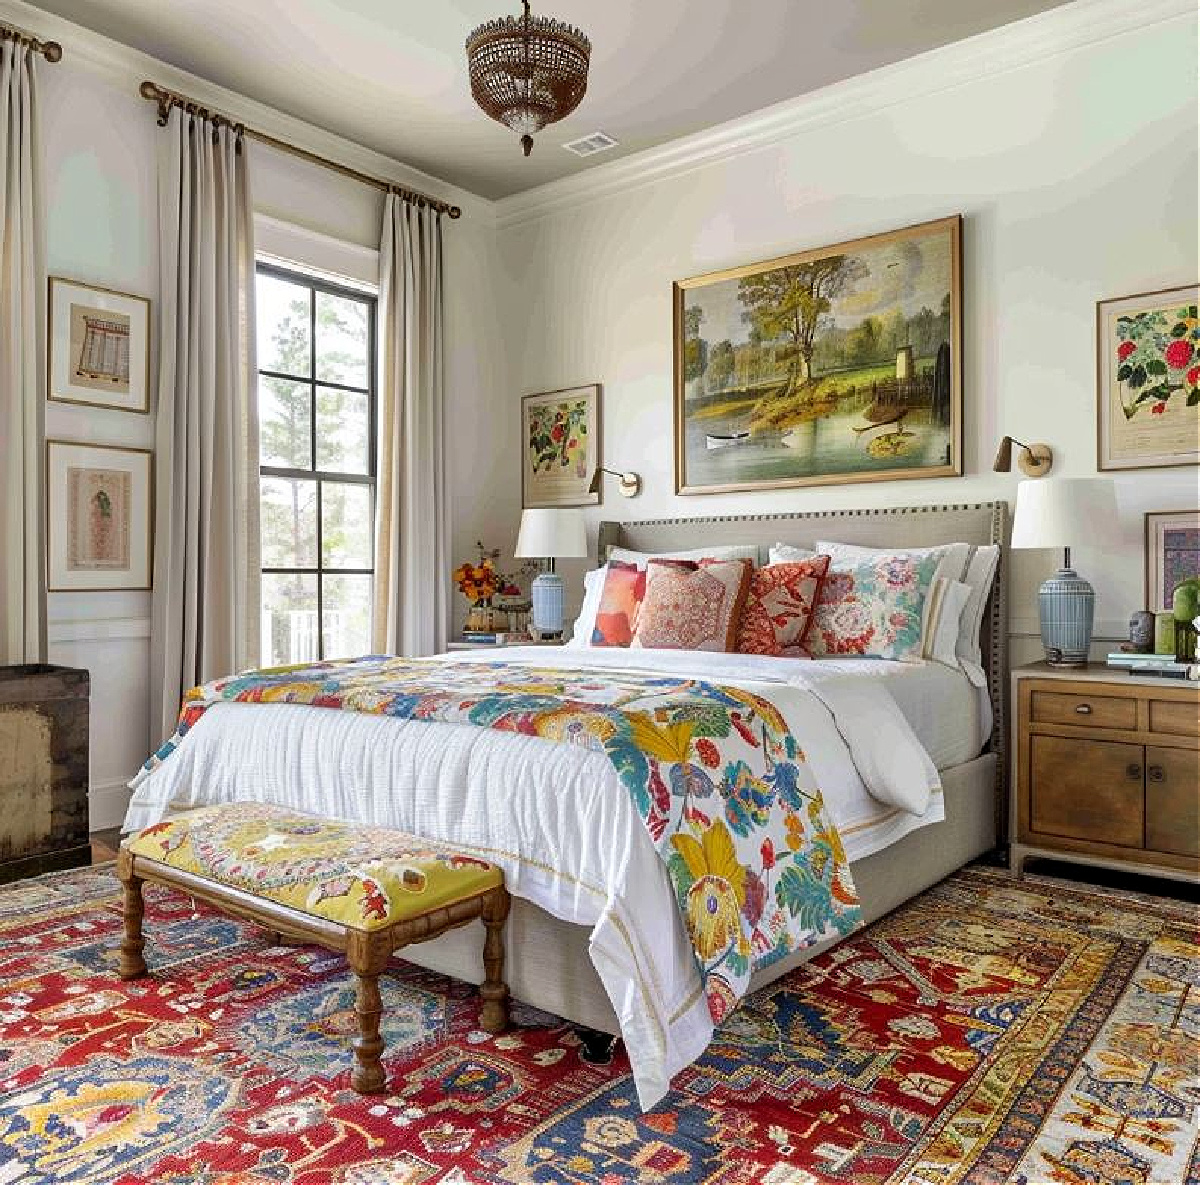 choice of an area rug in a colorful traditional pattern for a master bedroom